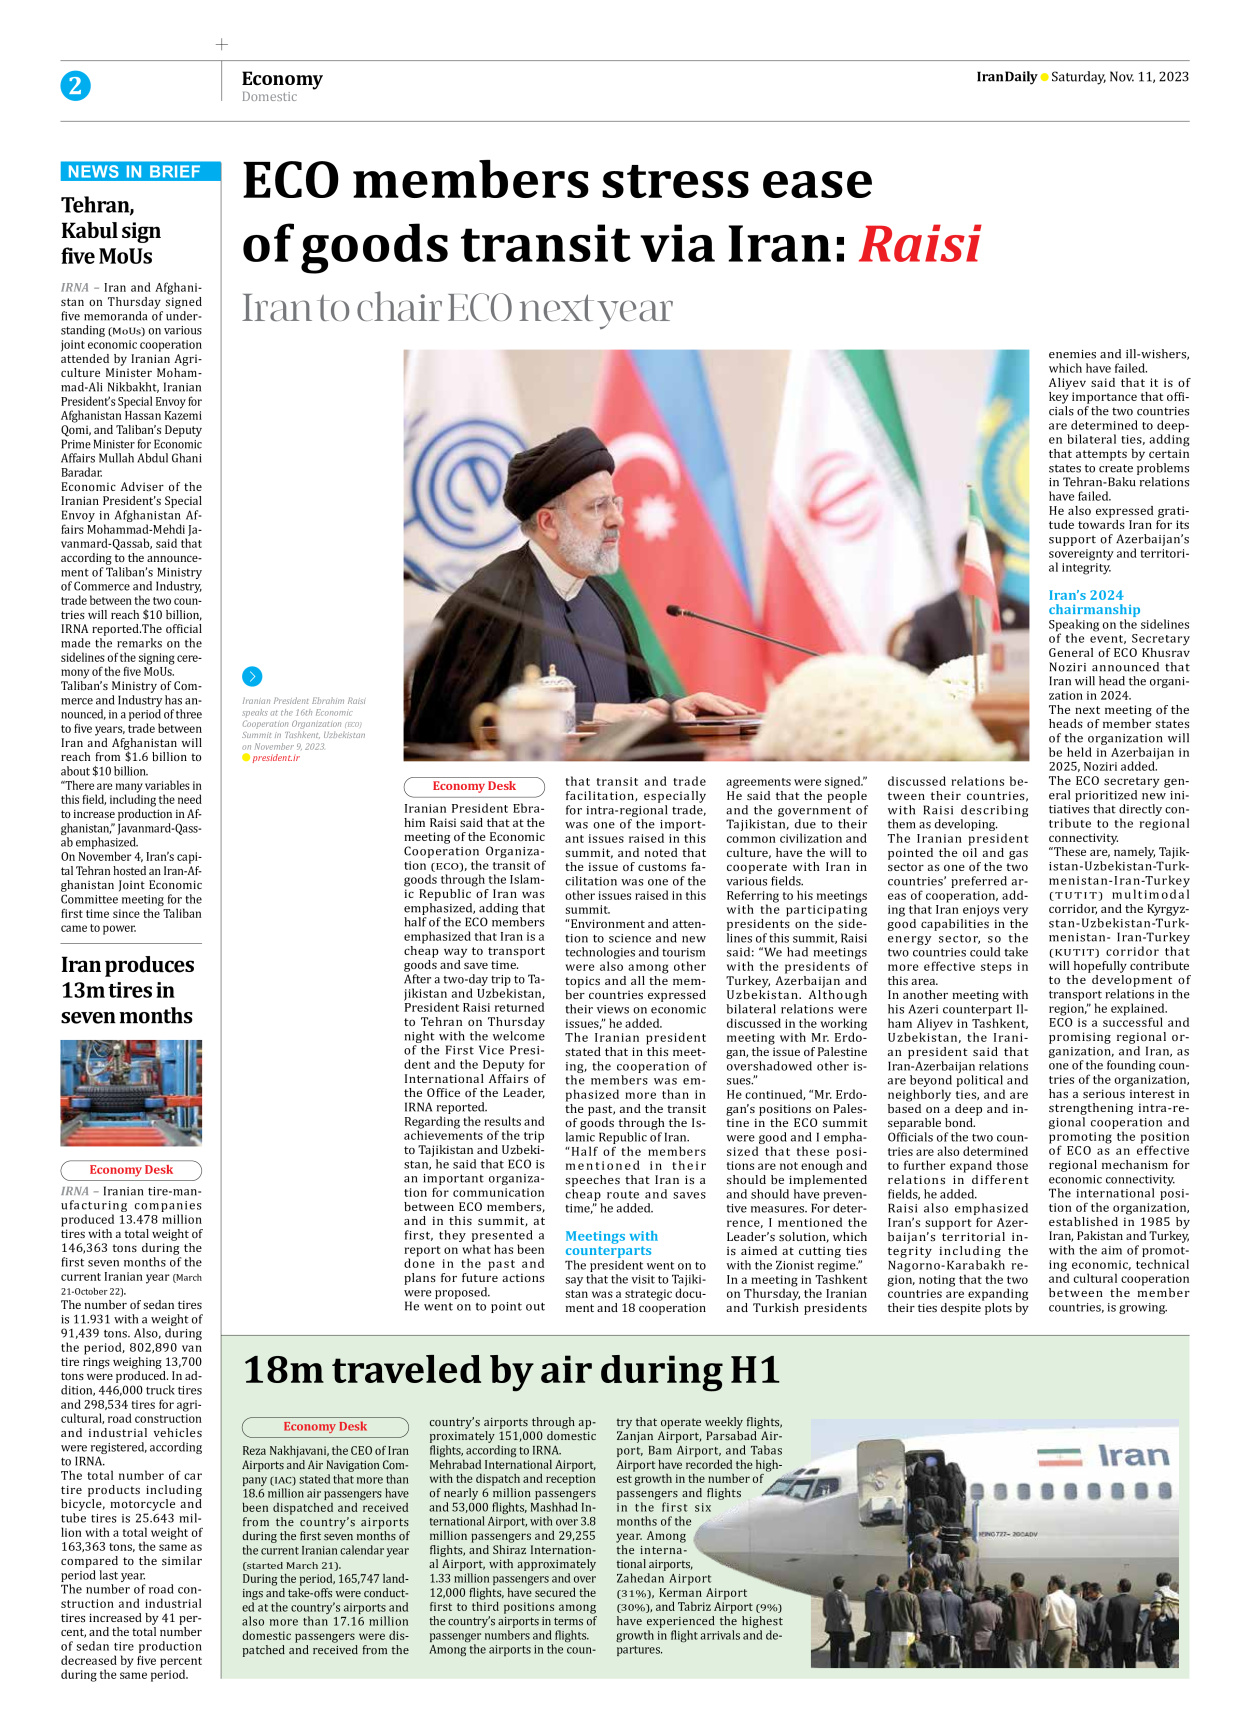 Iran Daily - Number Seven Thousand Four Hundred and Thirty One - 11 November 2023 - Page 2